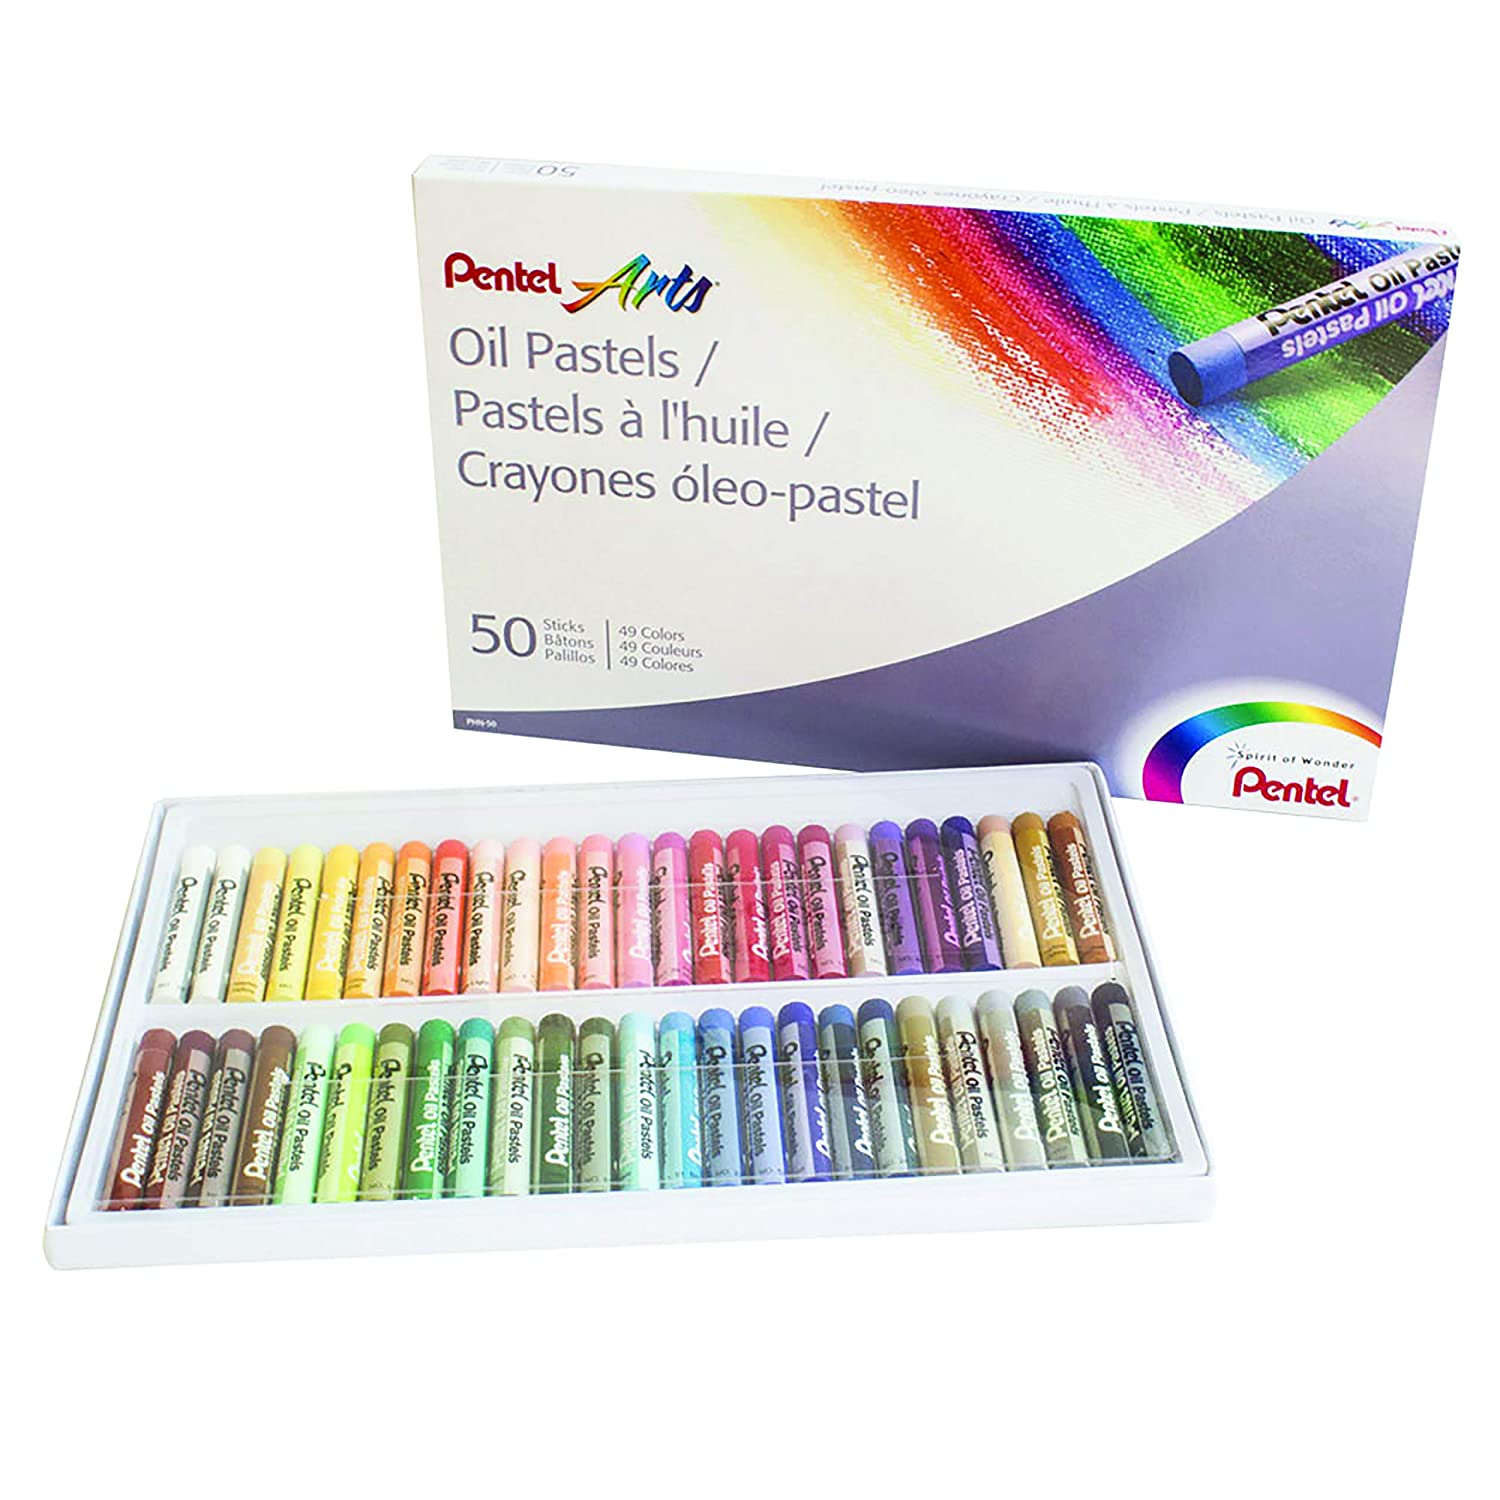 Doms Oil Pastels 50 Shades for Drawing and Painting Color Non-Toxic Kid's Craft 